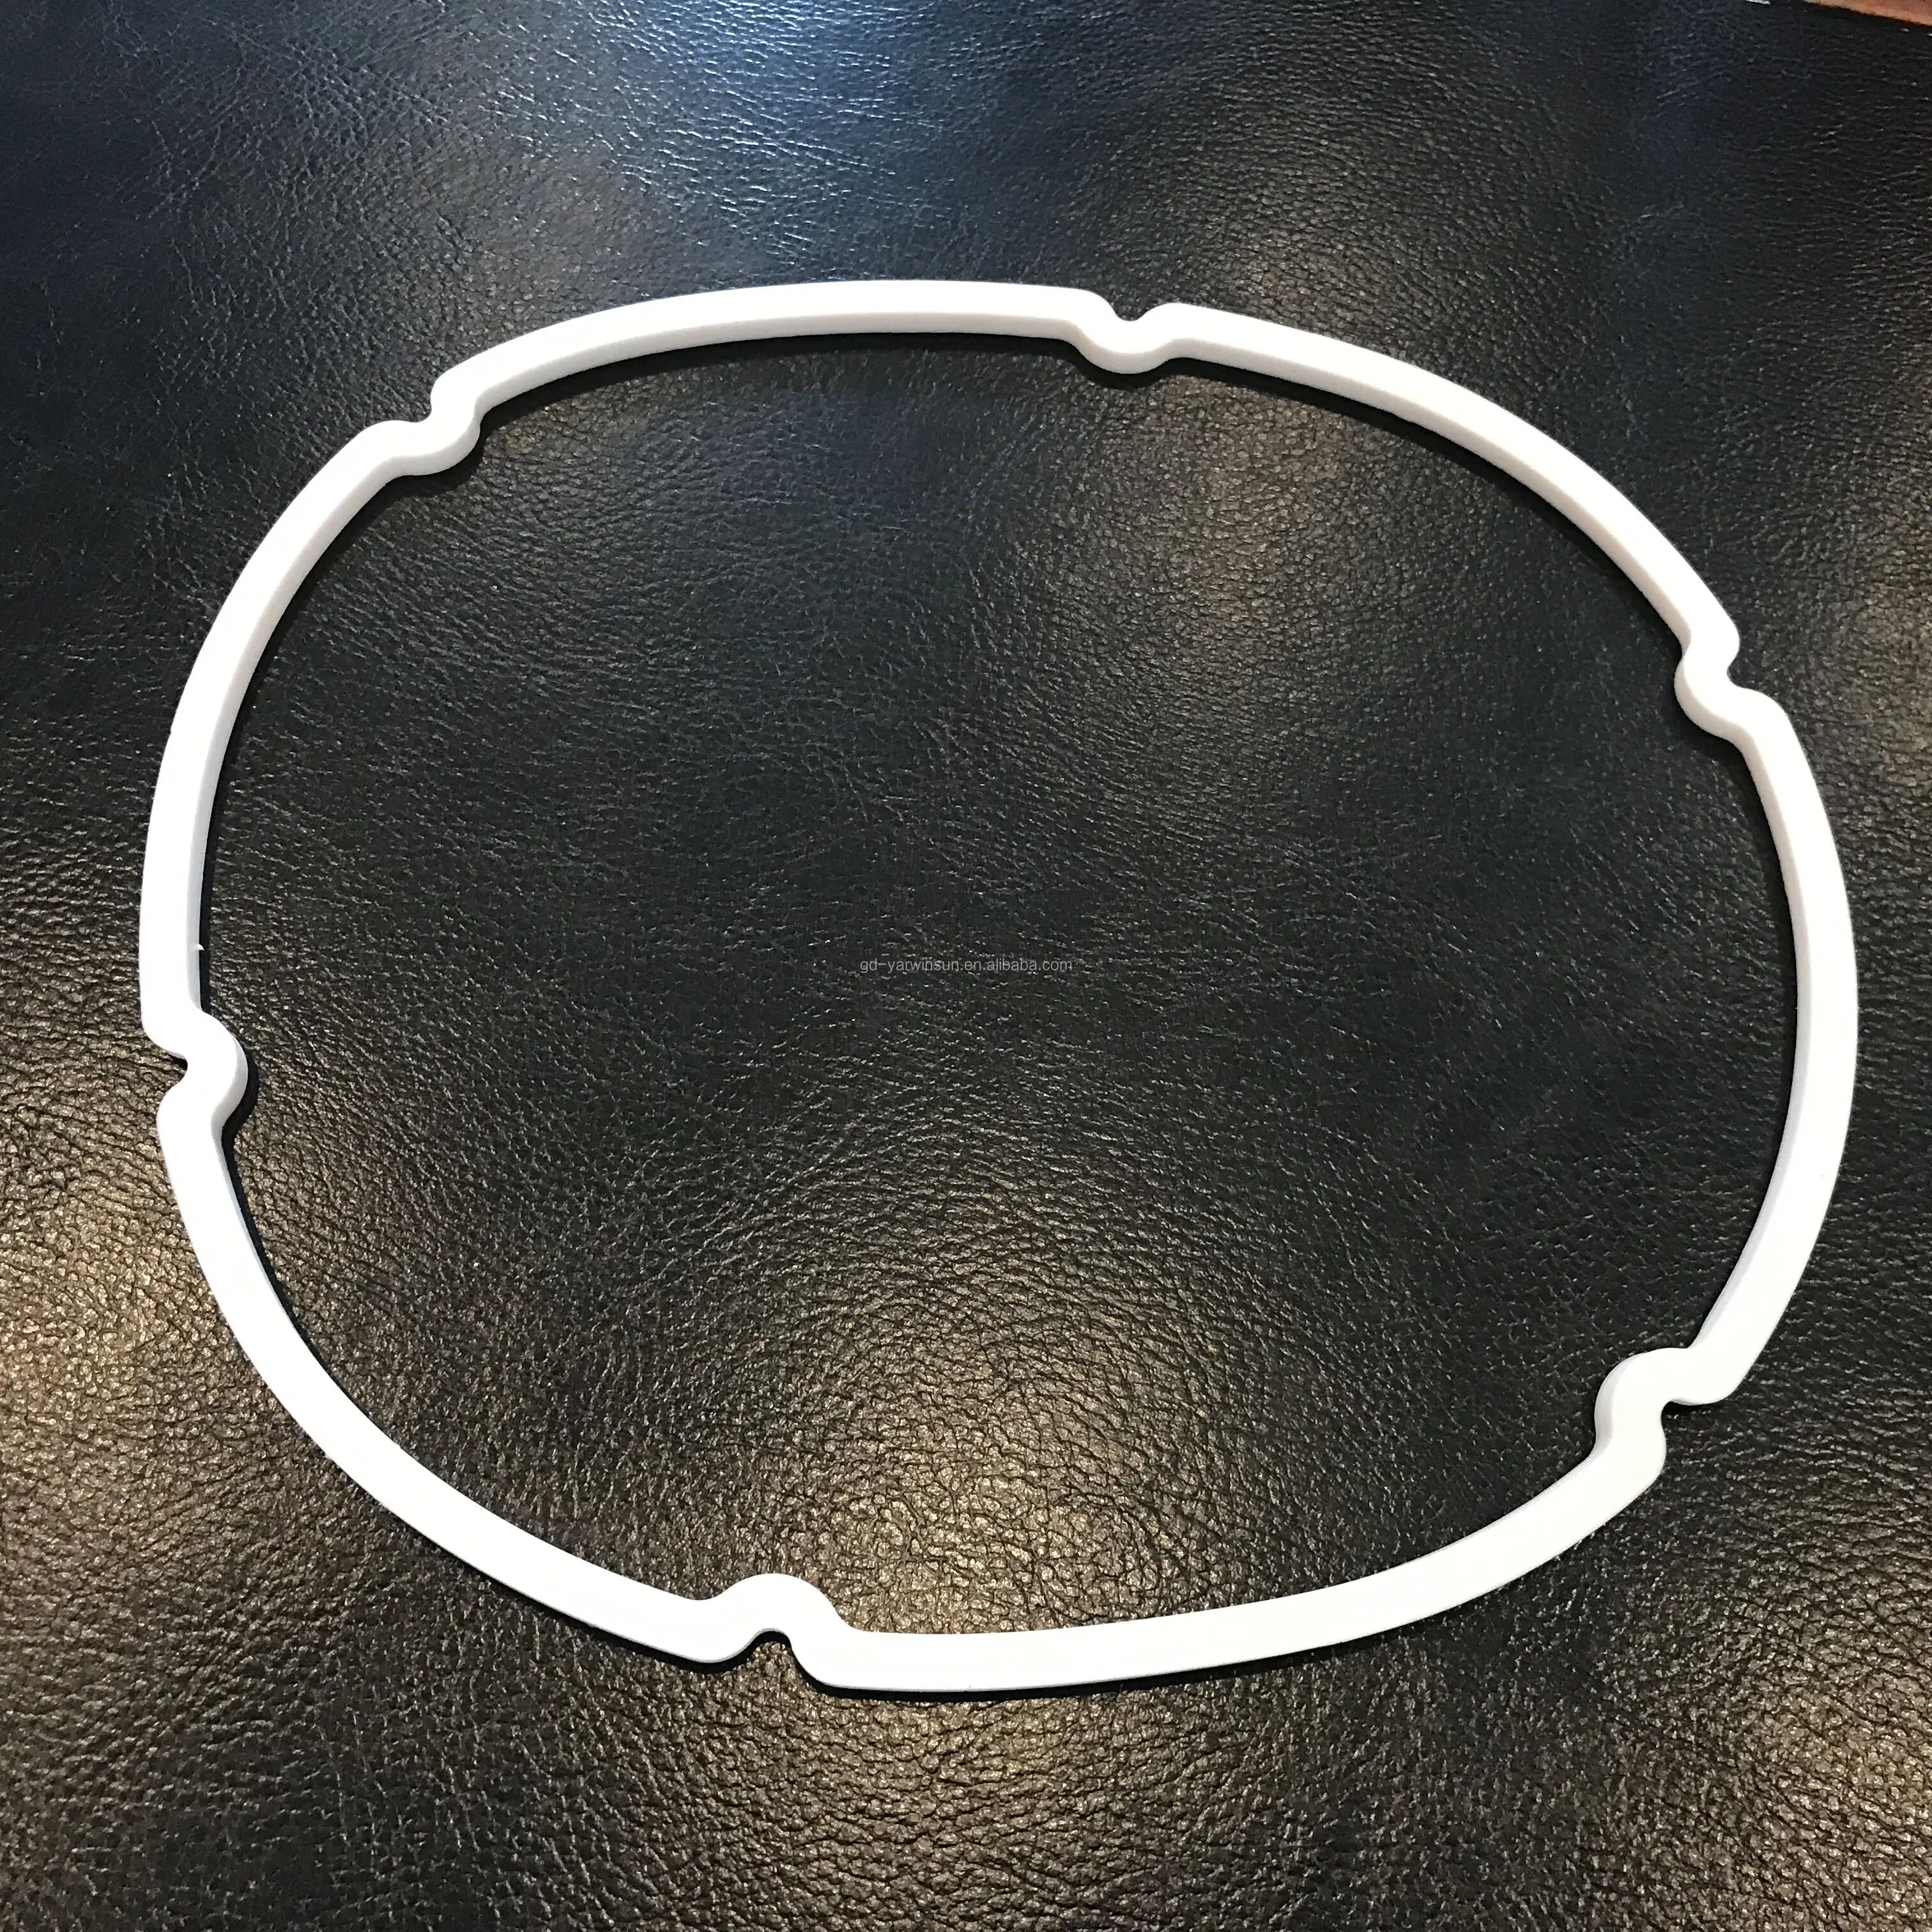 Molded silicone seal gasket for miner's lamp lighting